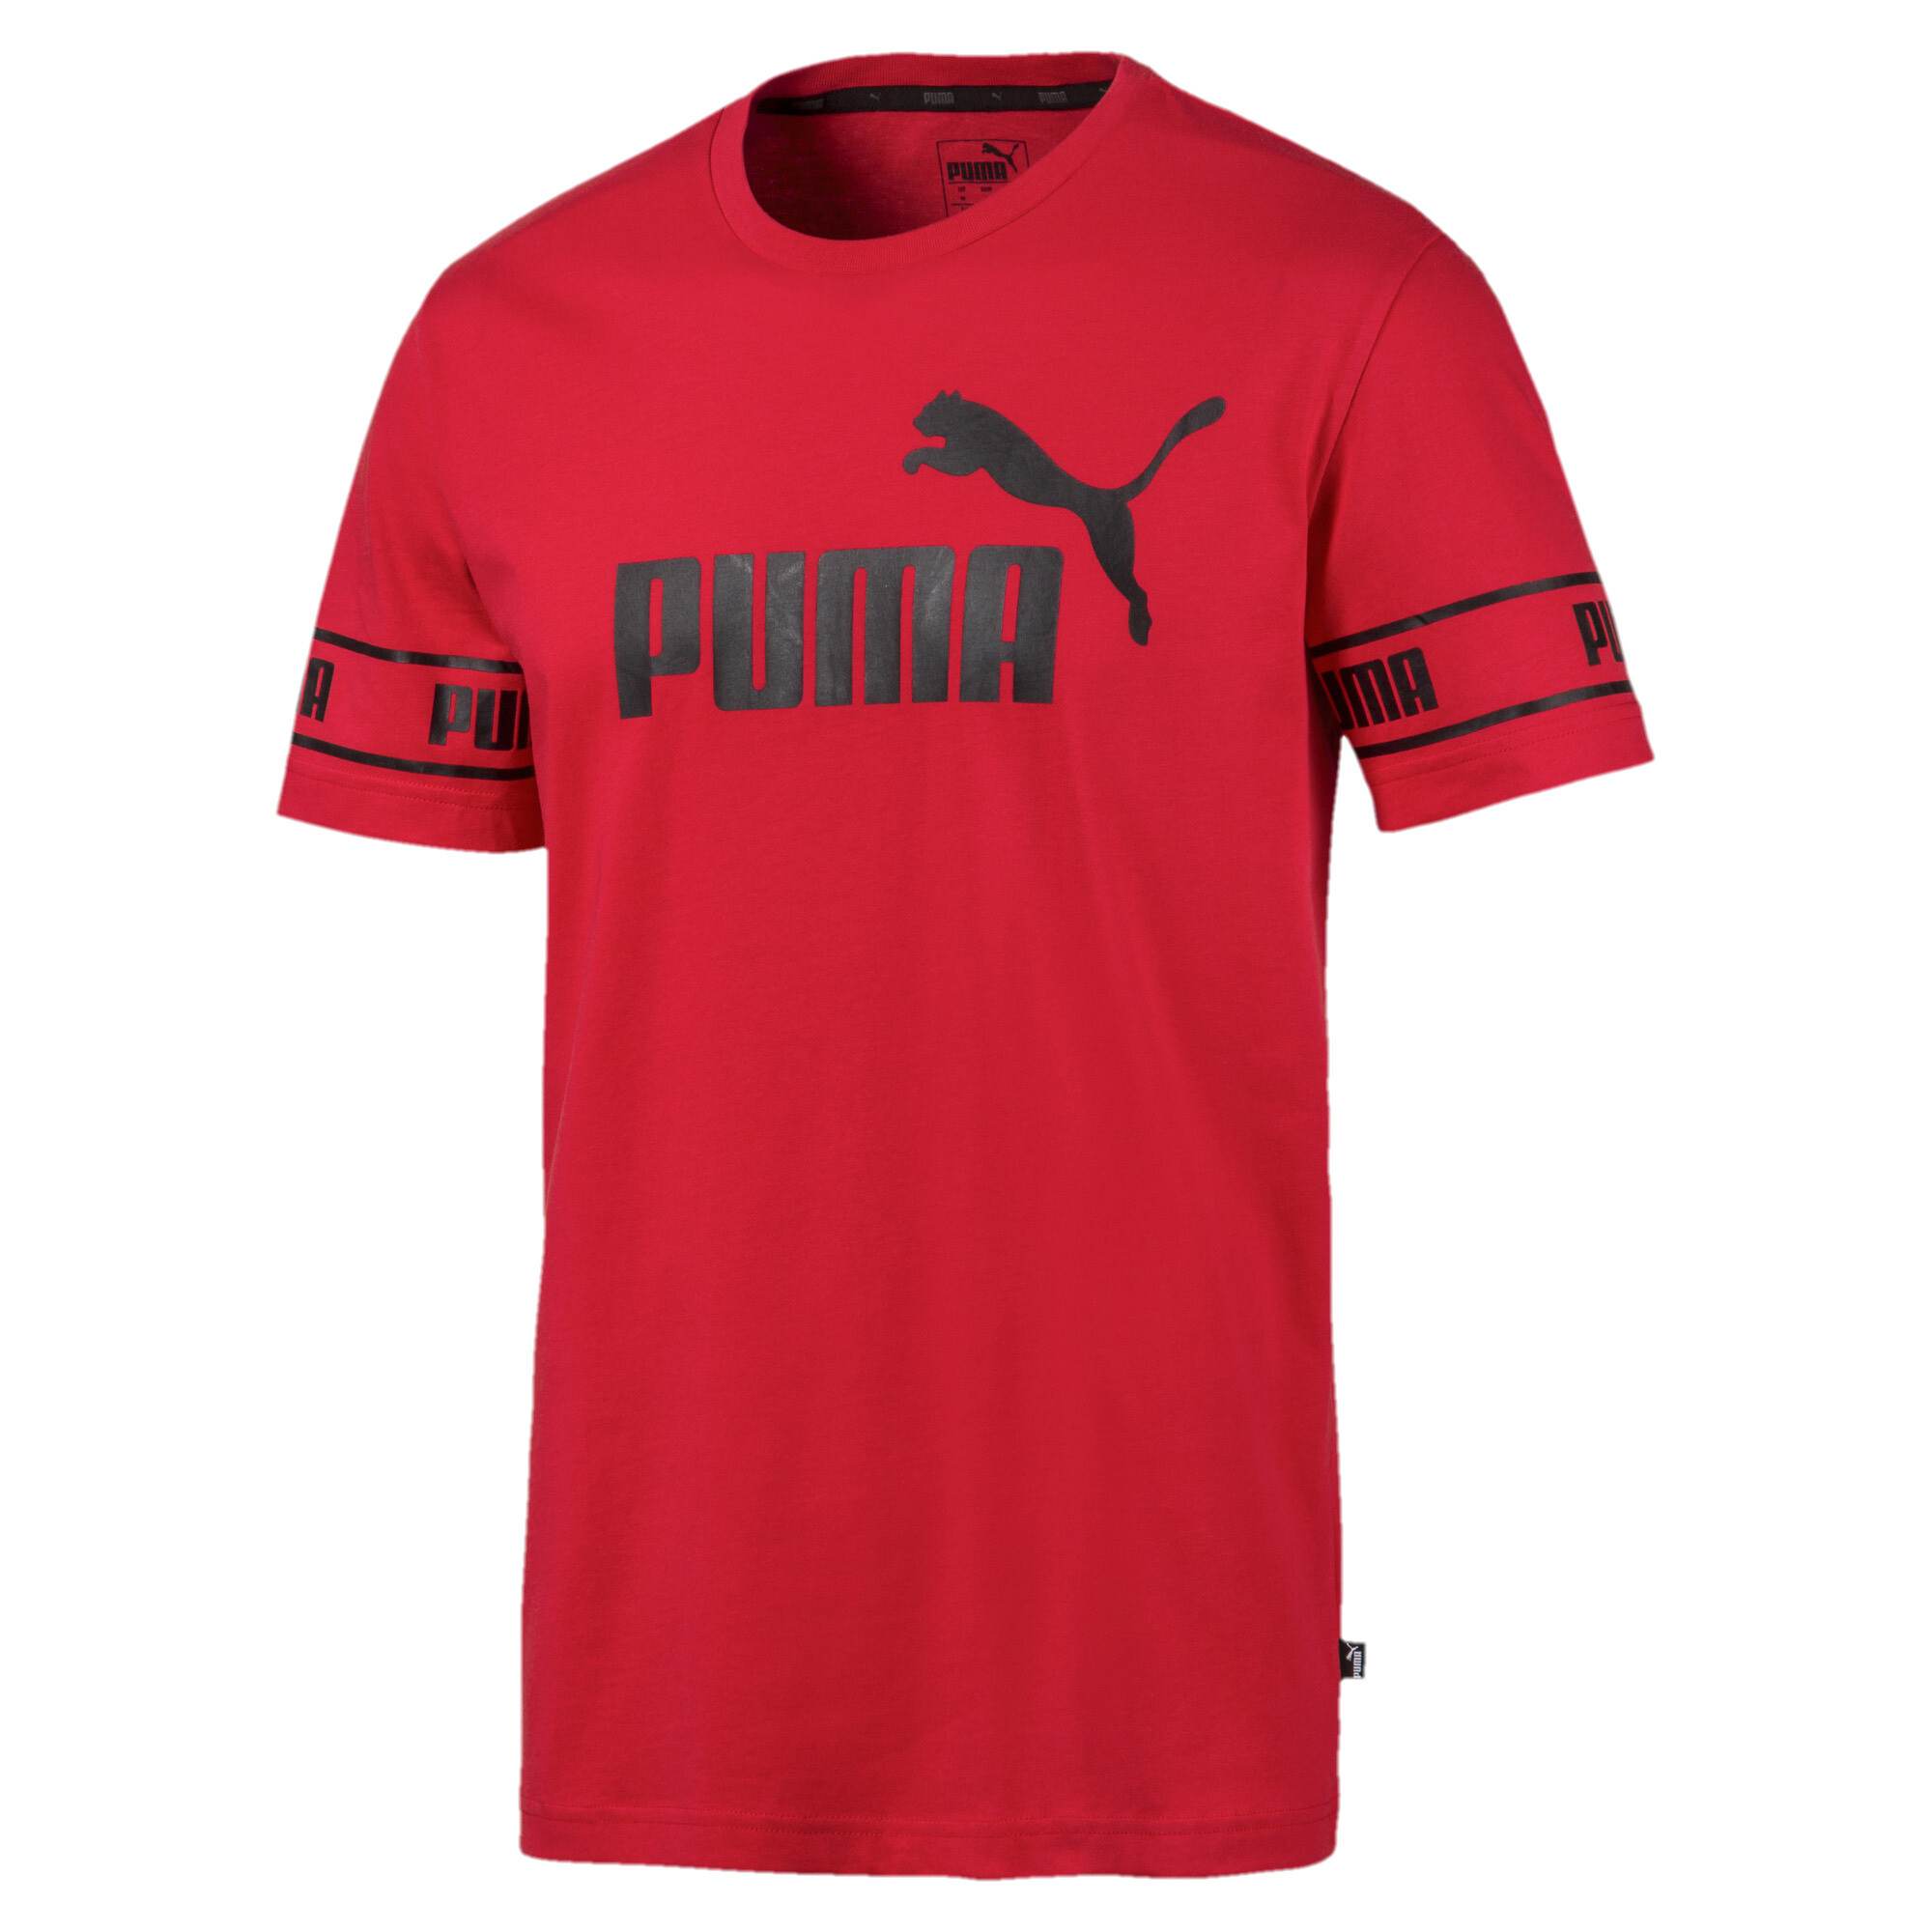 Men's Puma Amplified's T-Shirt, Red, Size 52/54, Clothing